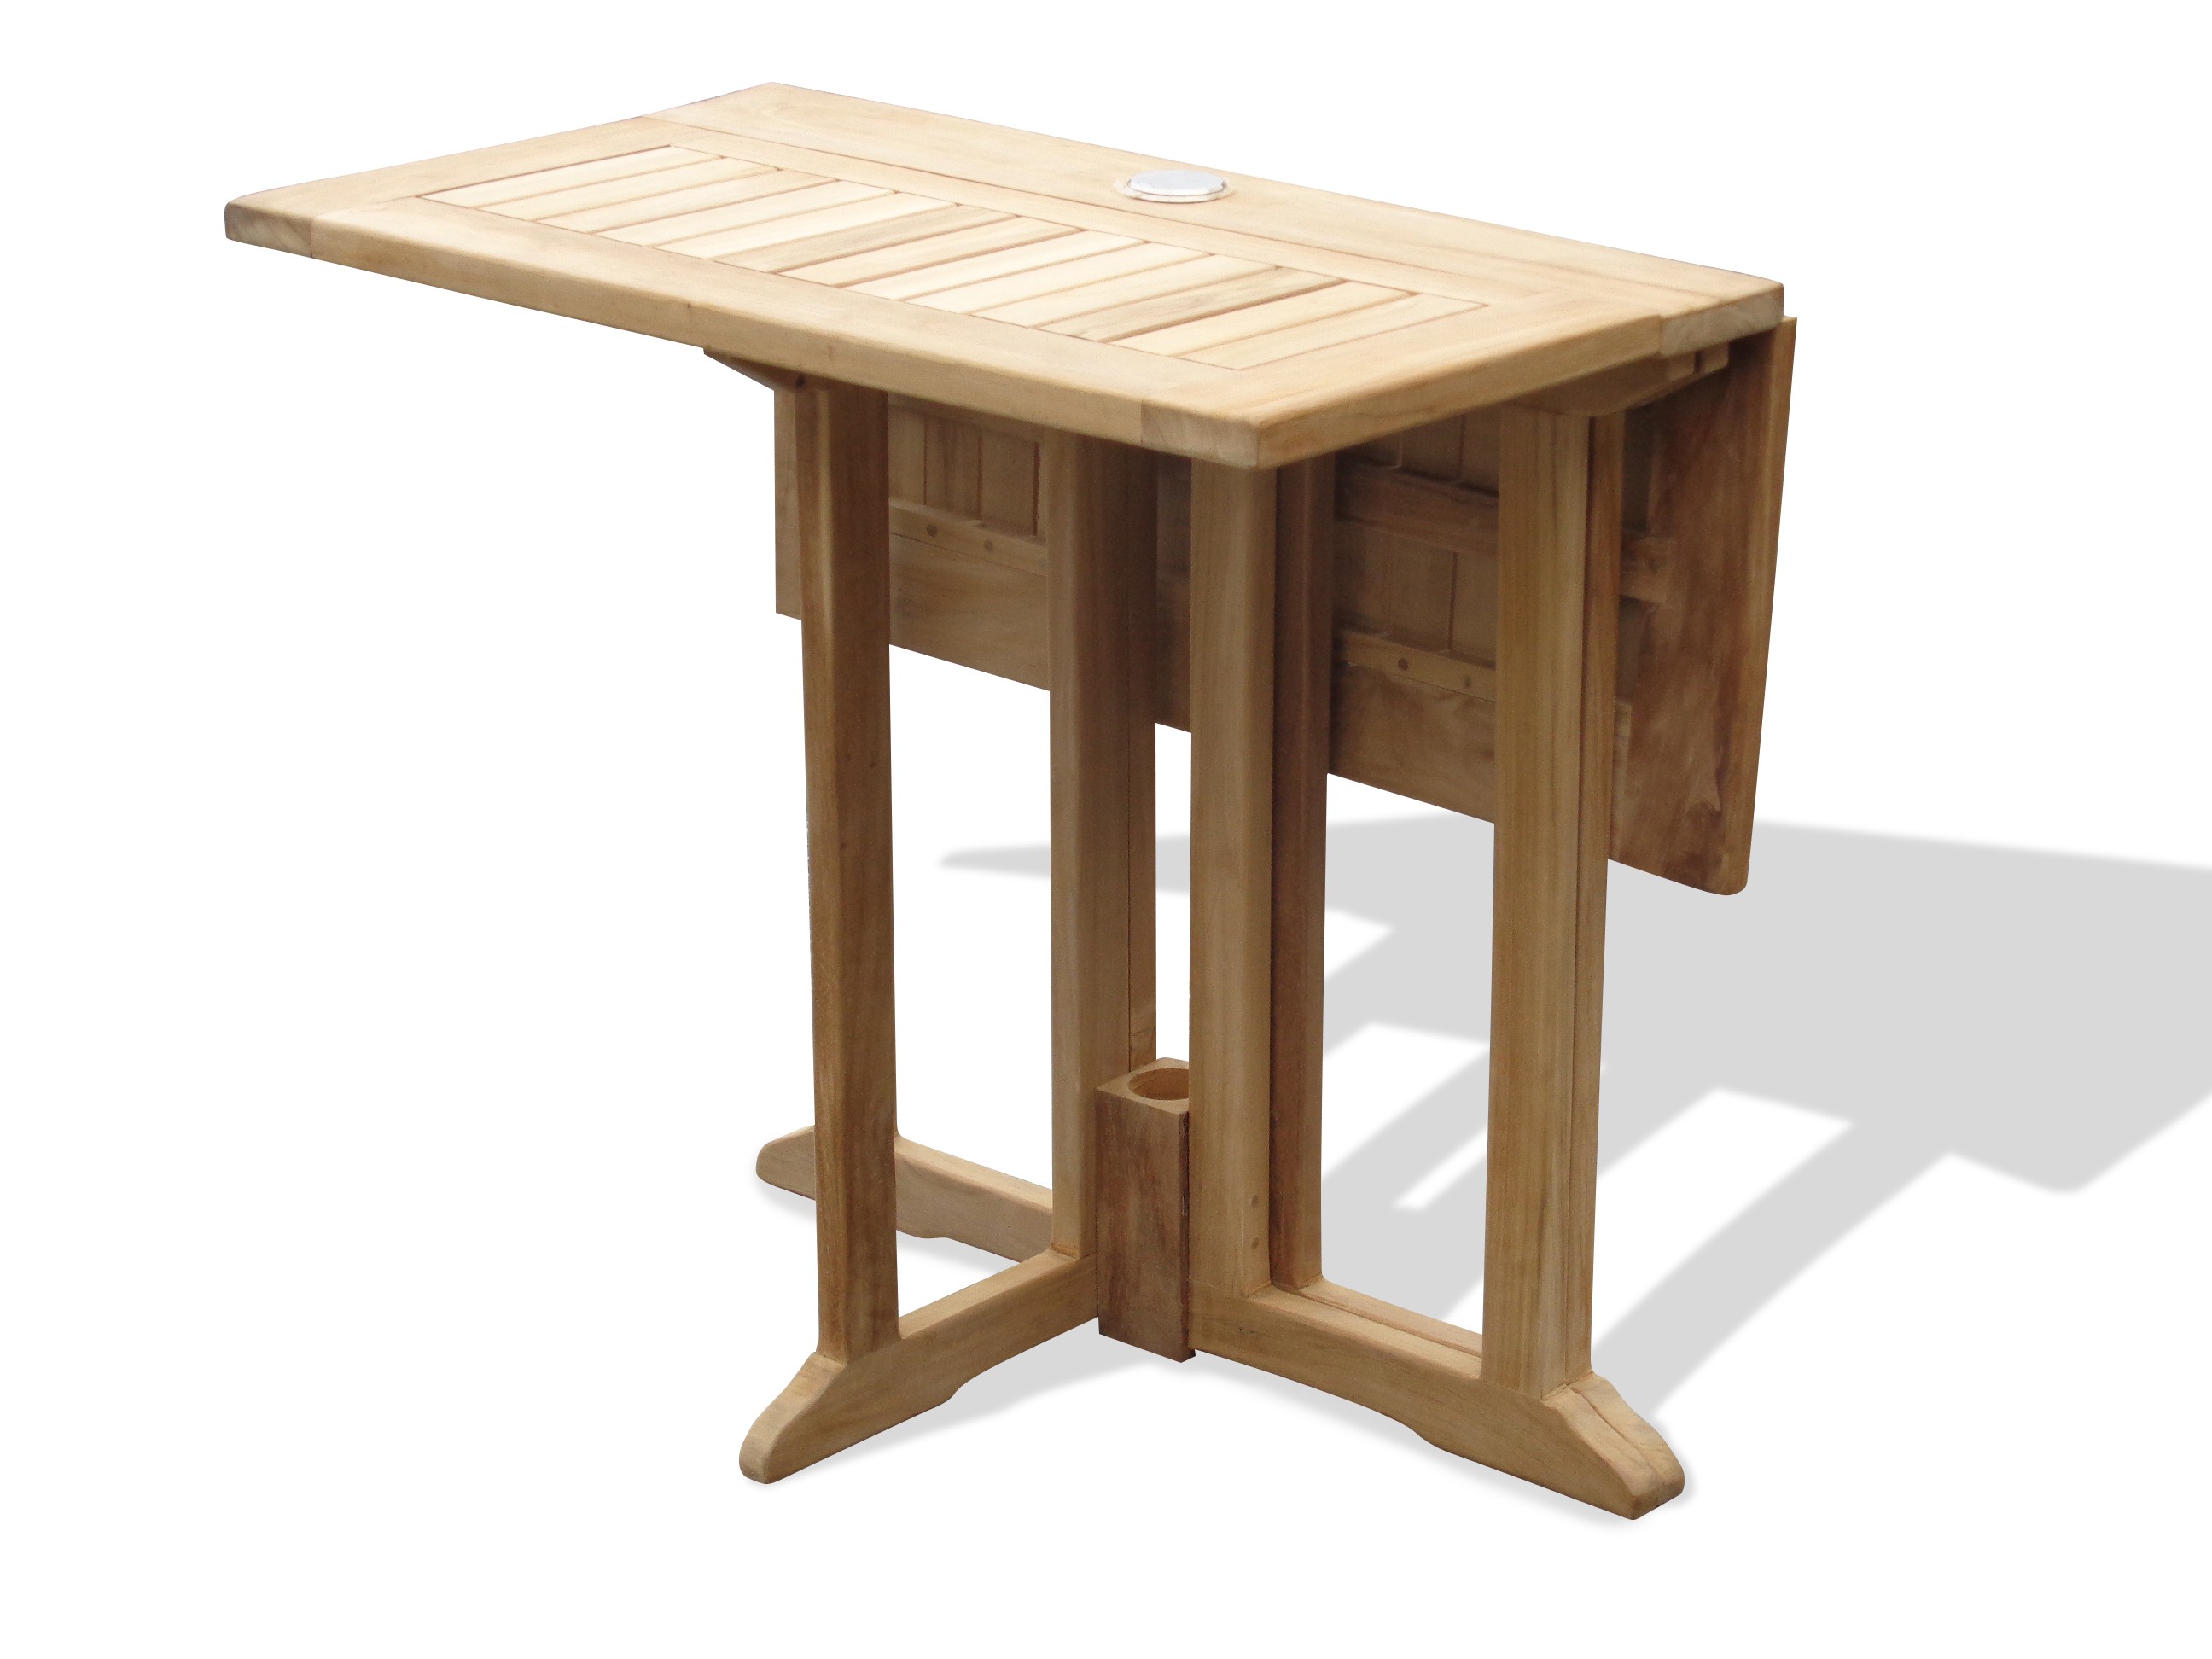 Barcelone 27" Square Drop Leaf Folding Teak Table...Use With 1 Leaf Up Or 2.... Makes 2 Different Tables